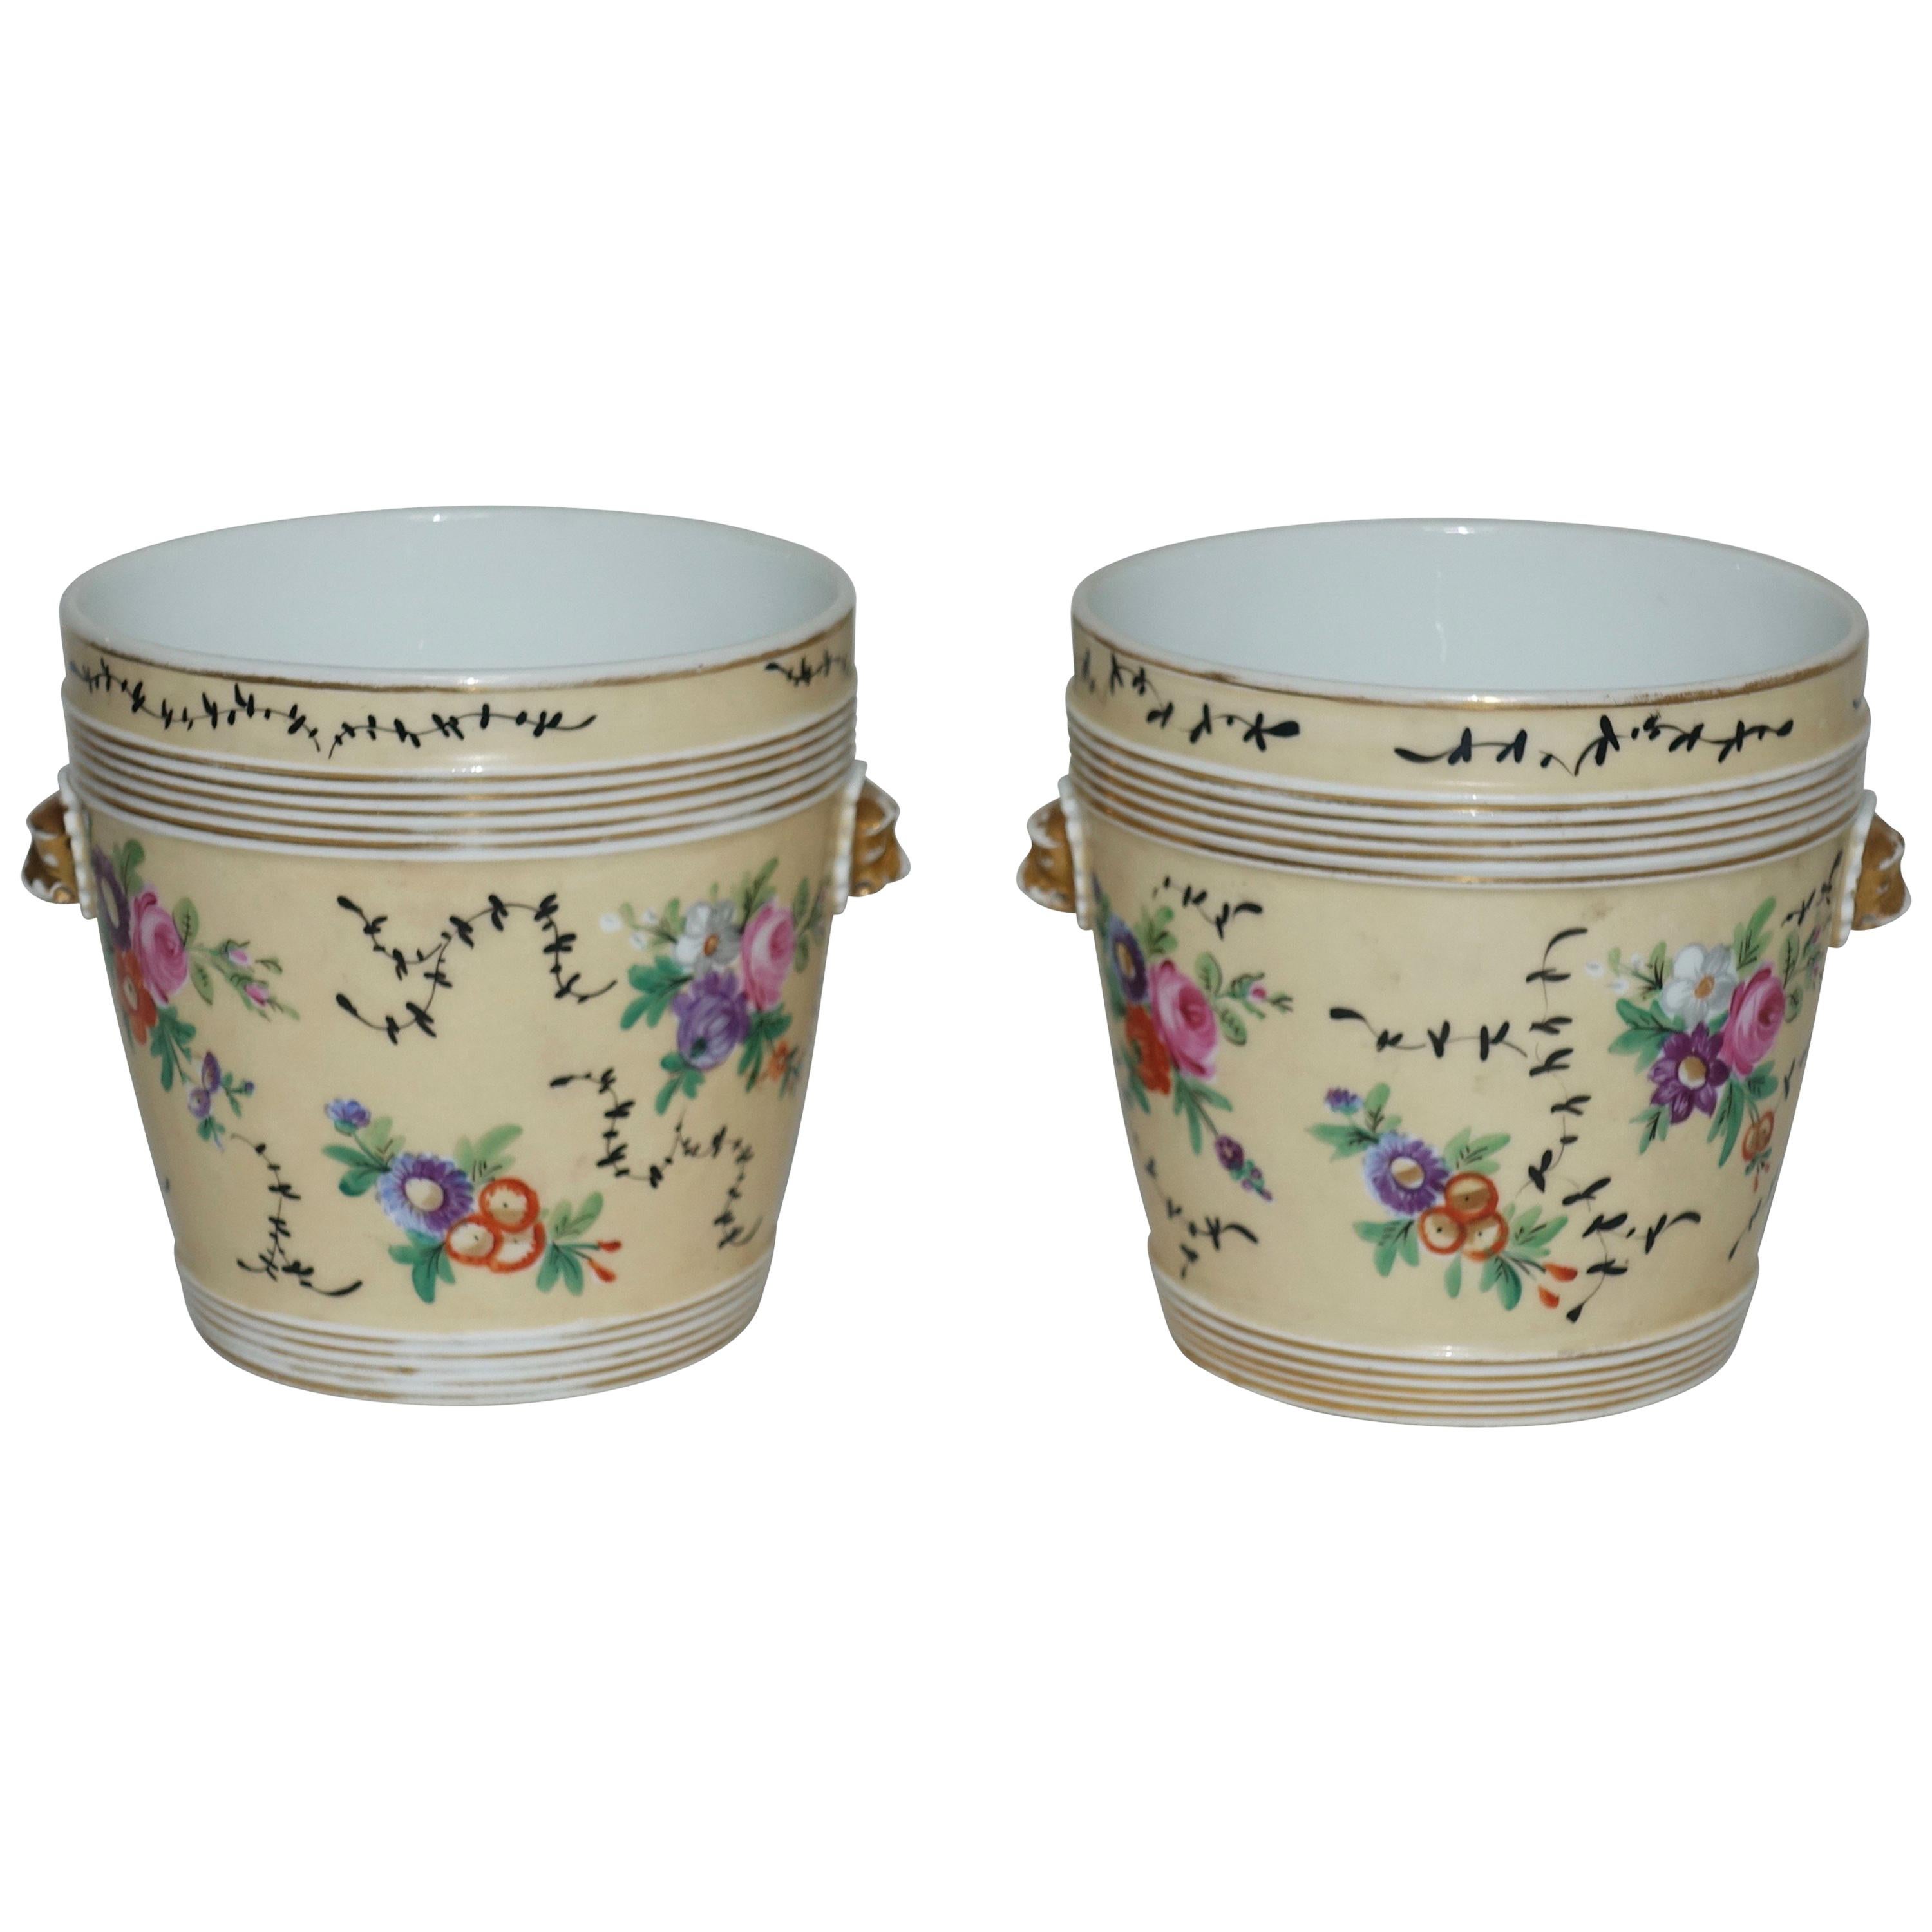 Pair of Paris Porcelain Cachepots with Hand-Painted Flowers, French, circa 1860